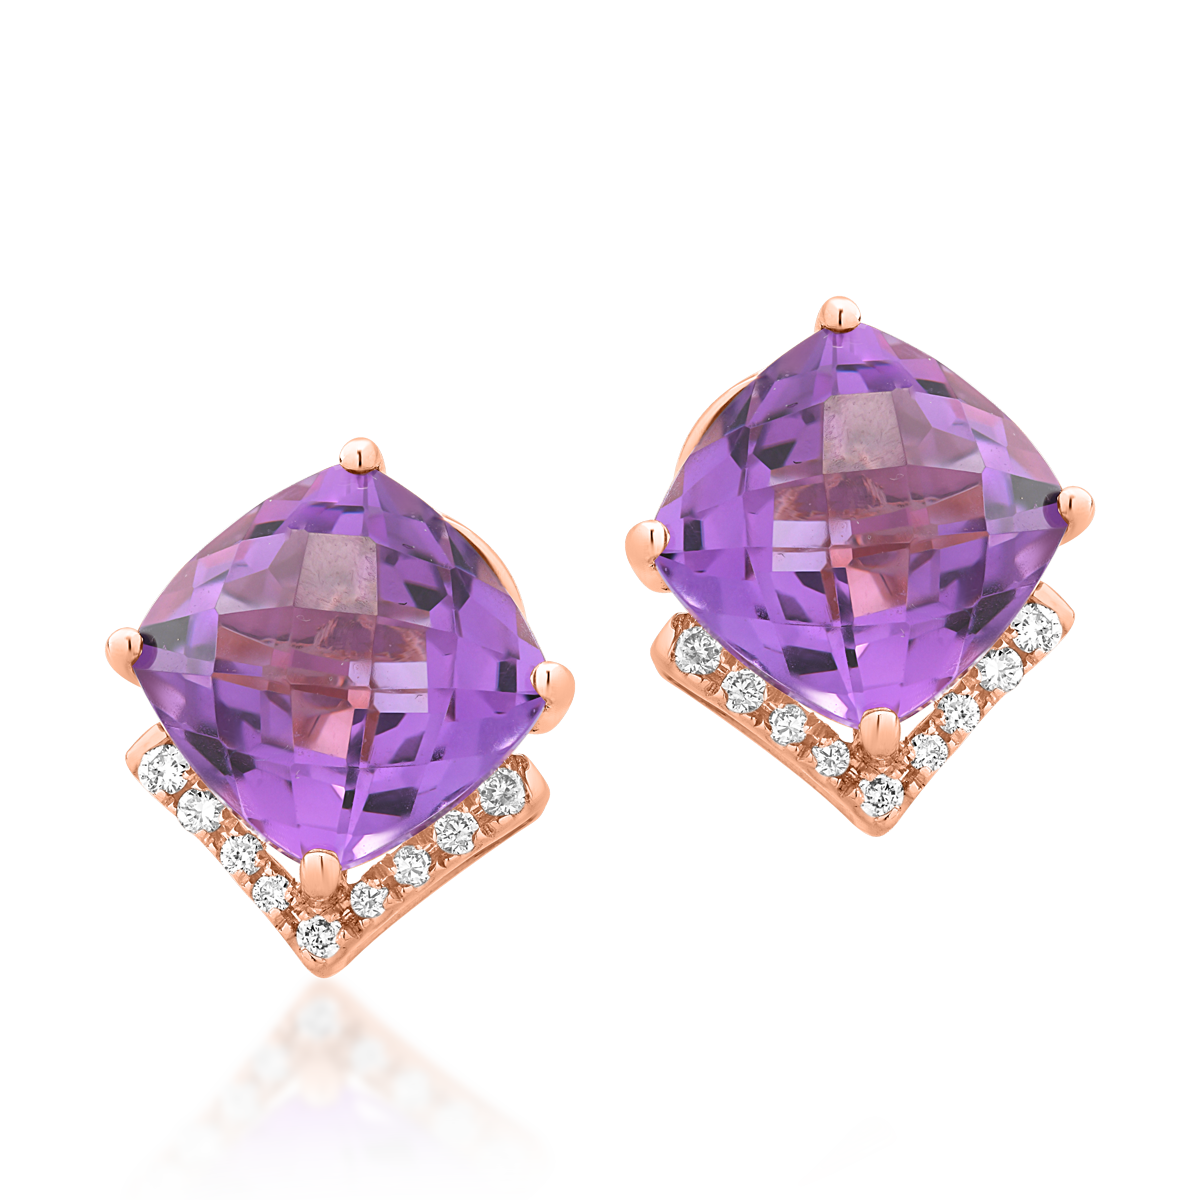 18K rose gold earrings with 4.5ct amethysts and 0.1ct diamonds